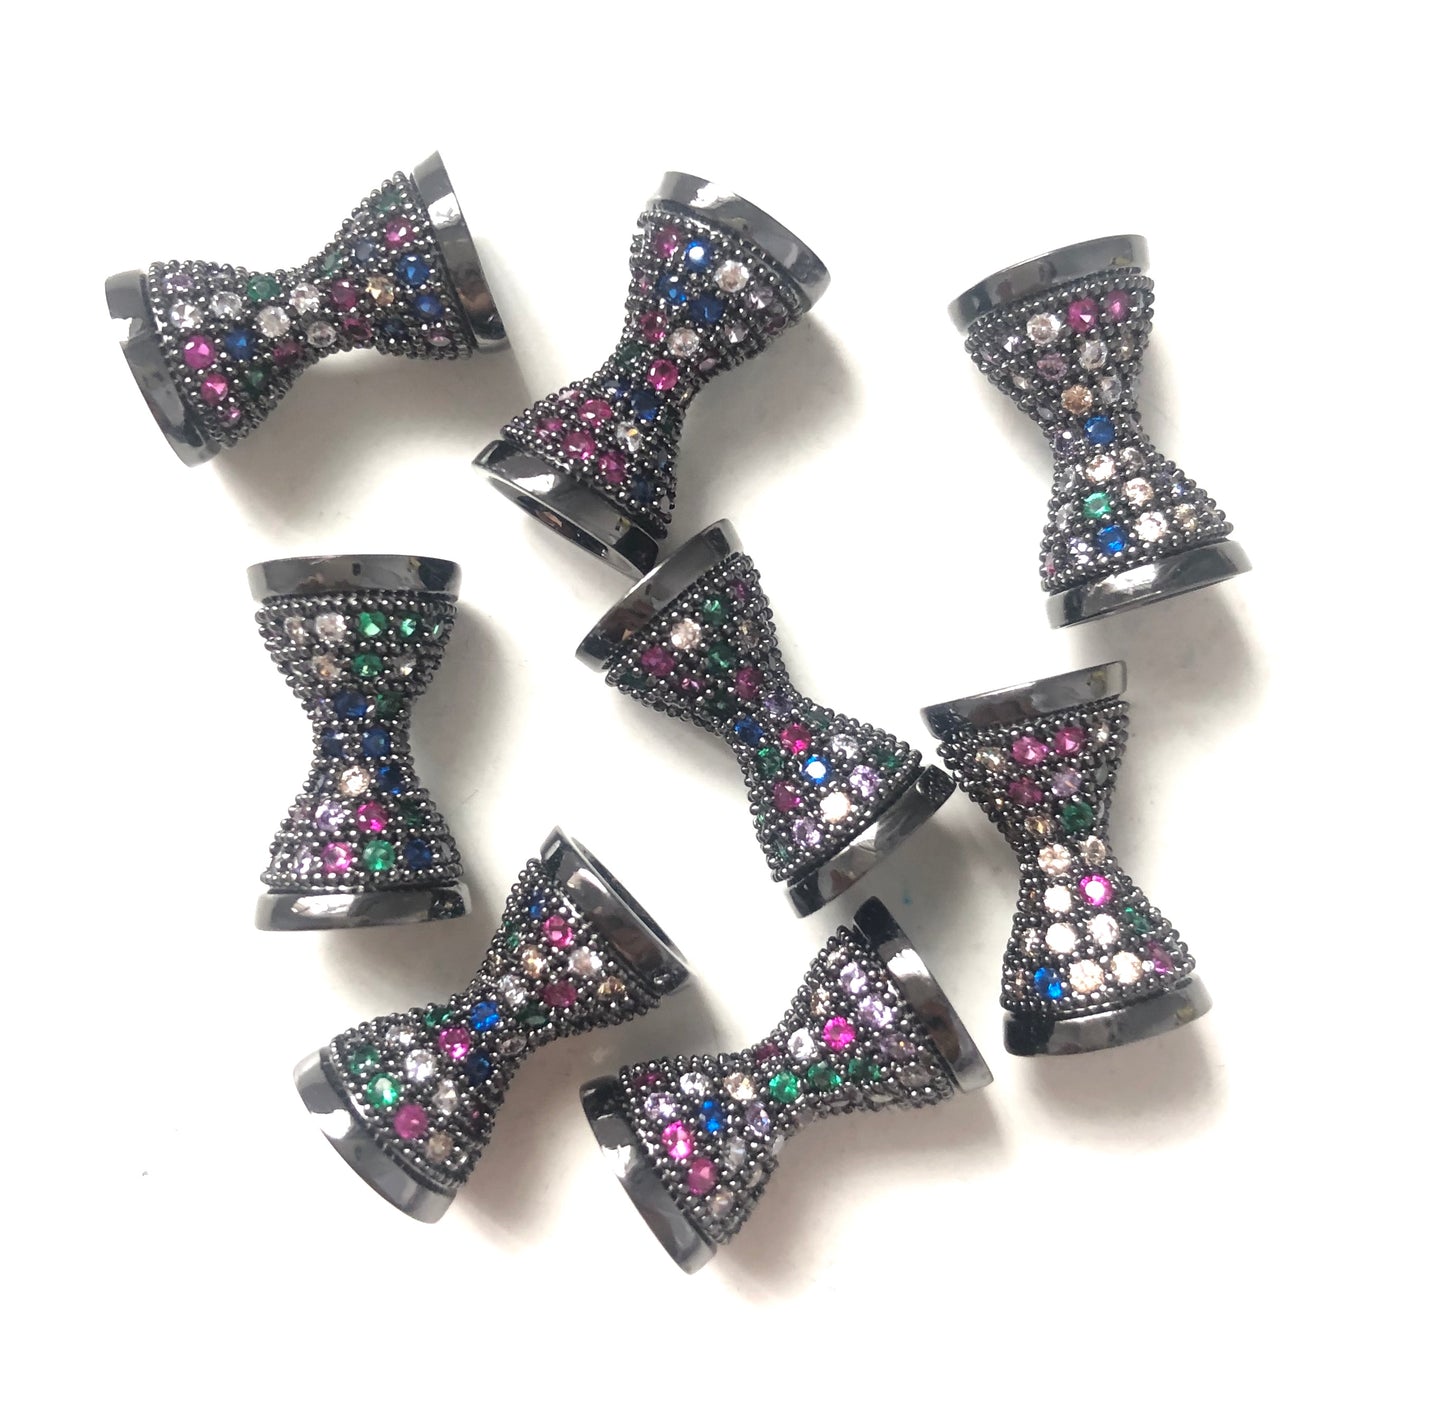 10pcs/lot 17.5*9.6mm Multicolor CZ Paved Hourglass Spacers Black CZ Paved Spacers Colorful Zirconia Hourglass Beads Charms Beads Beyond